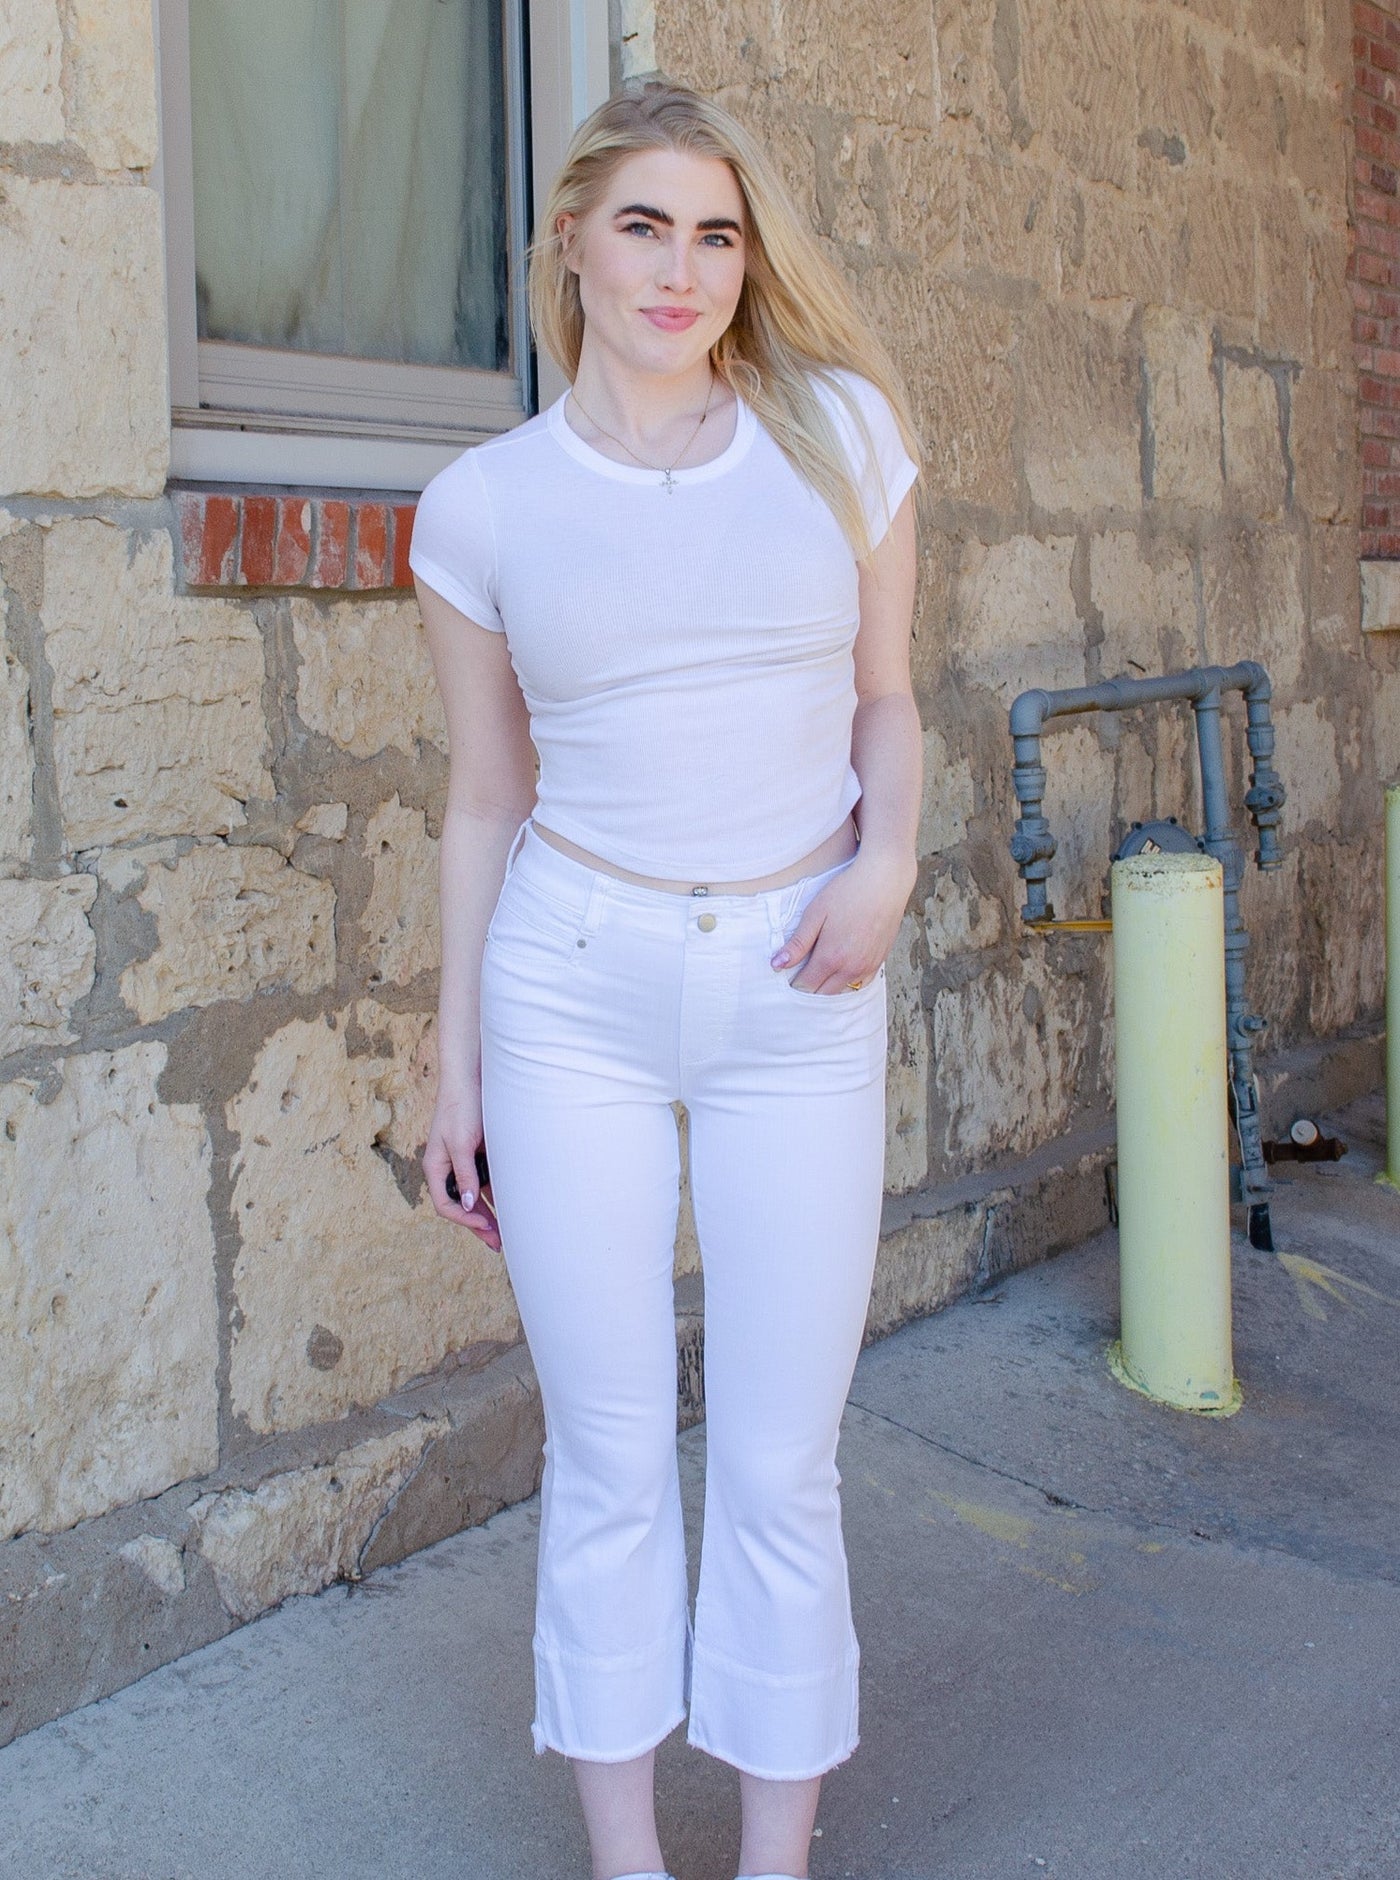 Model is wearing white mid rise denim jeans with frayed details at the hemming of the ankle. Jeans are worn with a white shirt. 